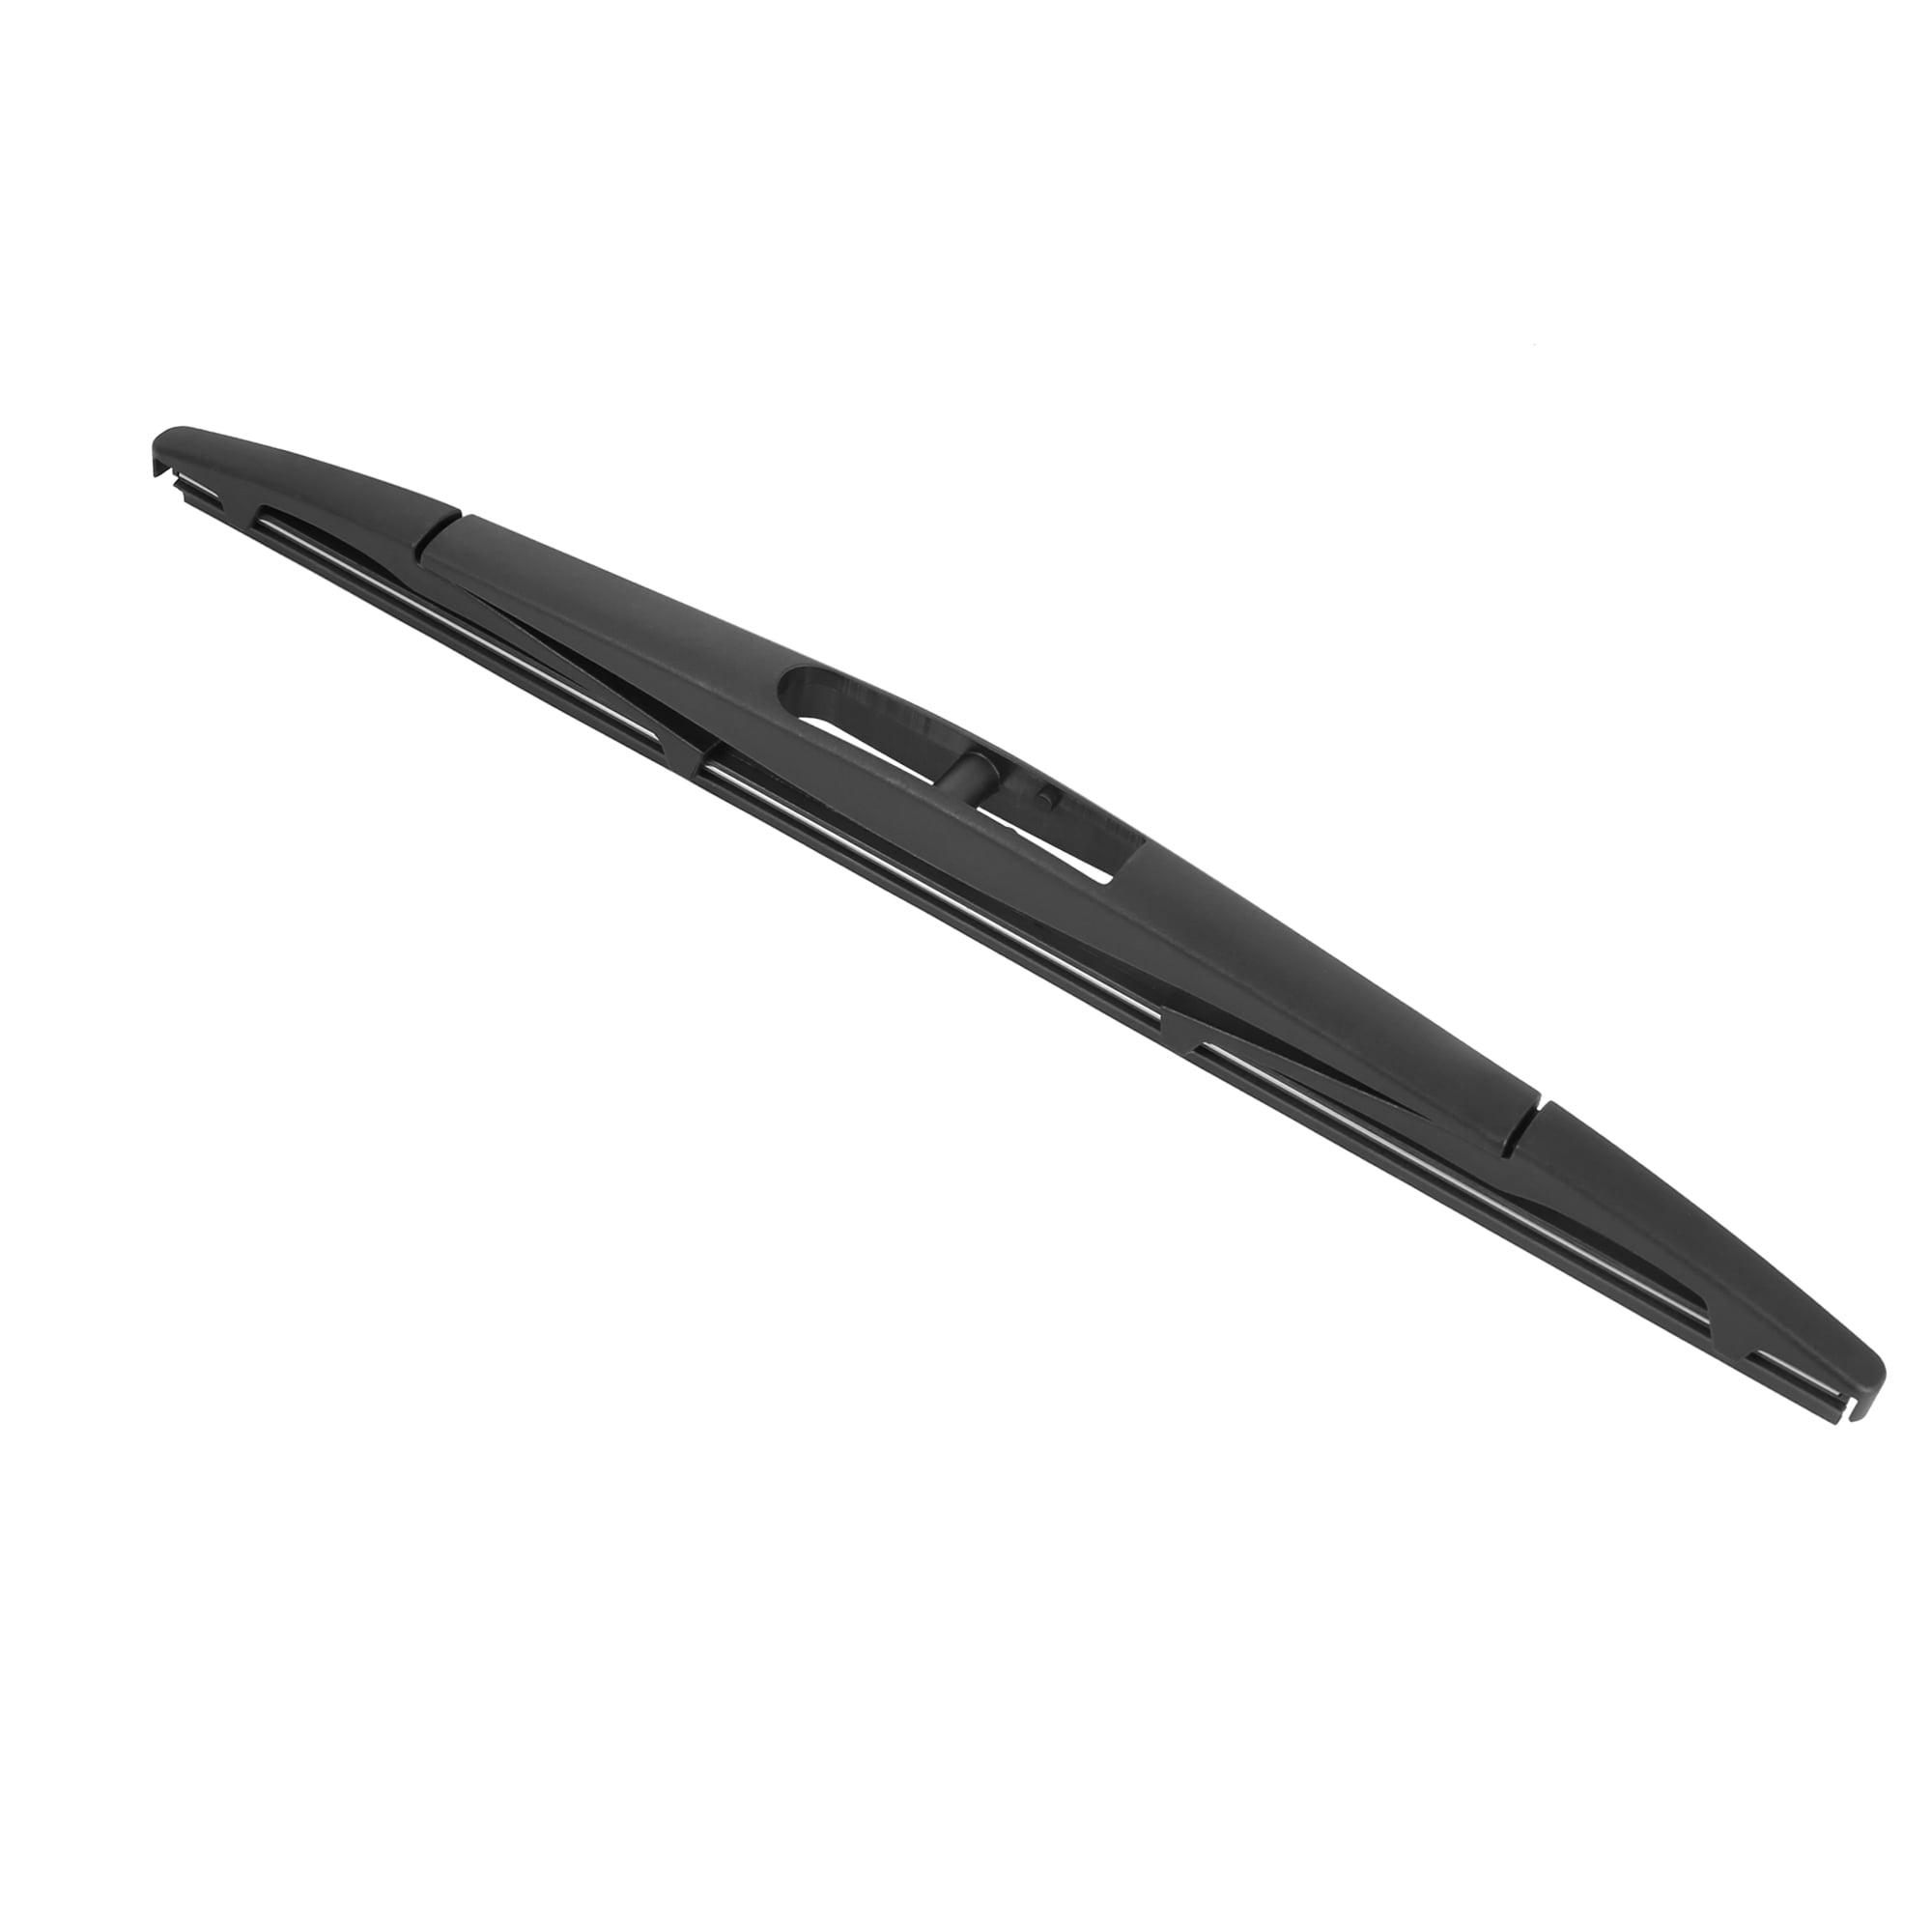 300mm Rear Windshield Wiper Blade for 2013-2018 Honda Civic - Walmart.com - Walmart.com 2018 Honda Civic Si Wiper Blade Size